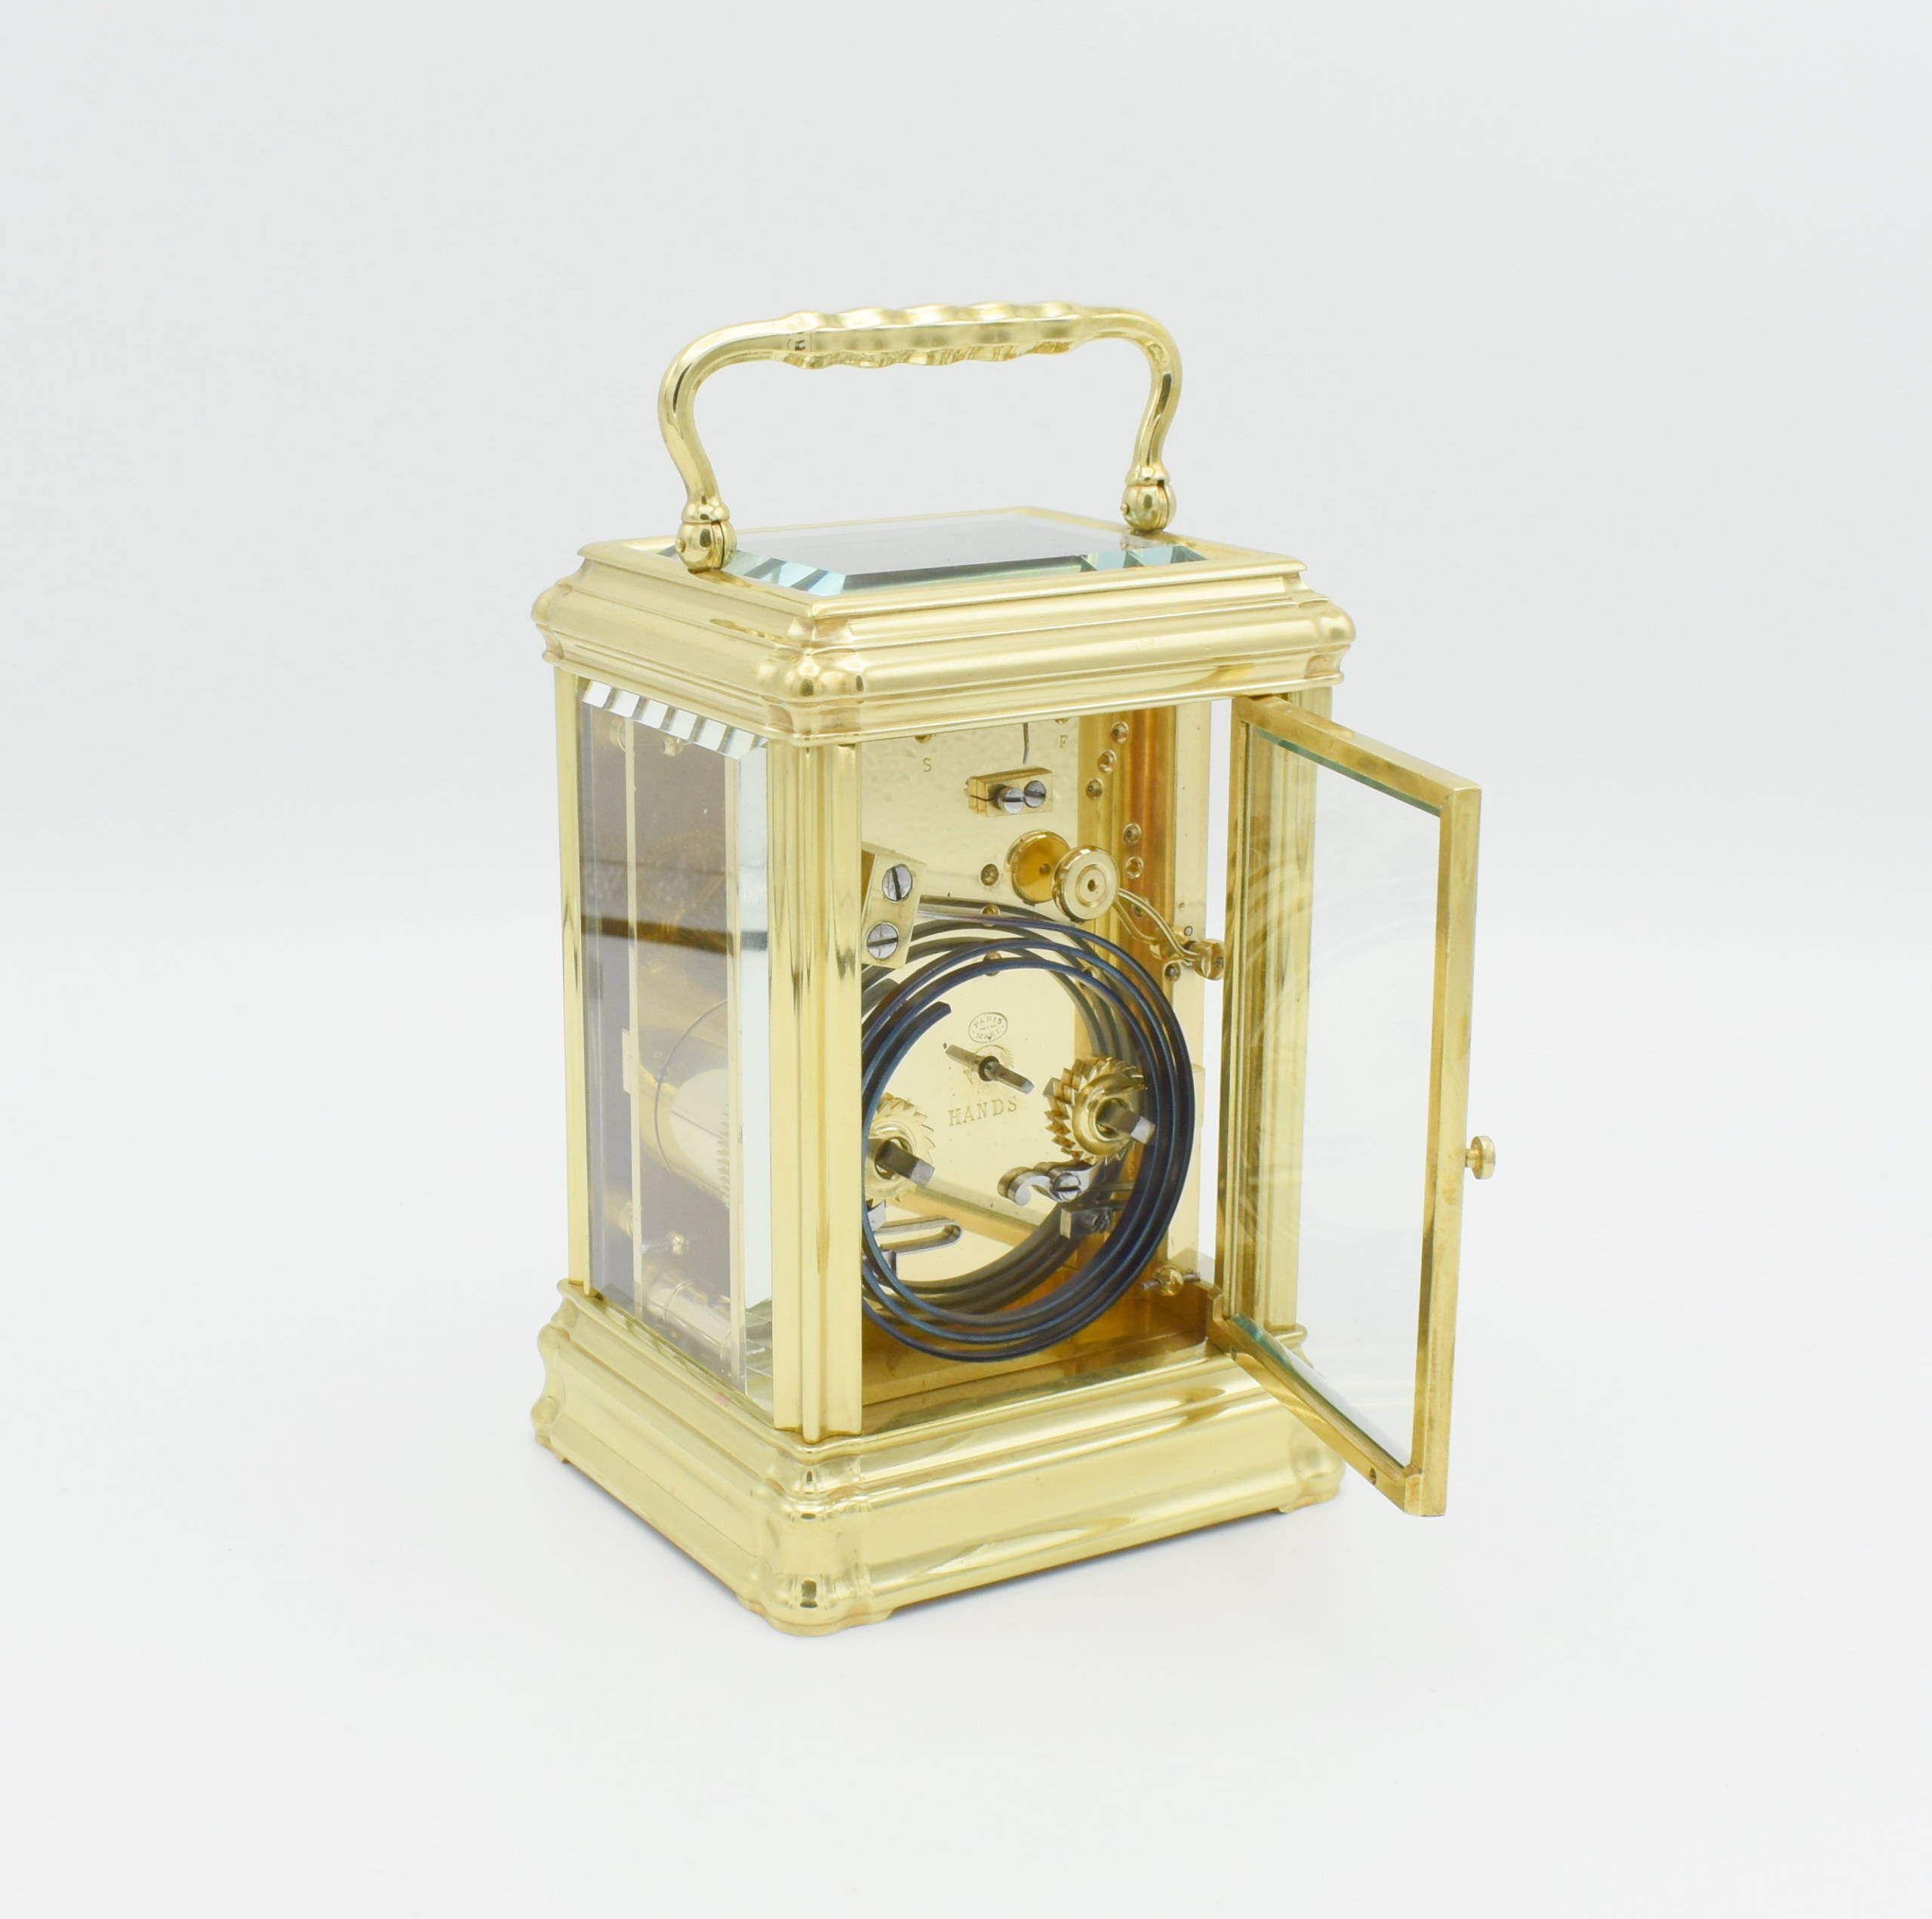 J.W.Benson Carriage Clock – It's About Time